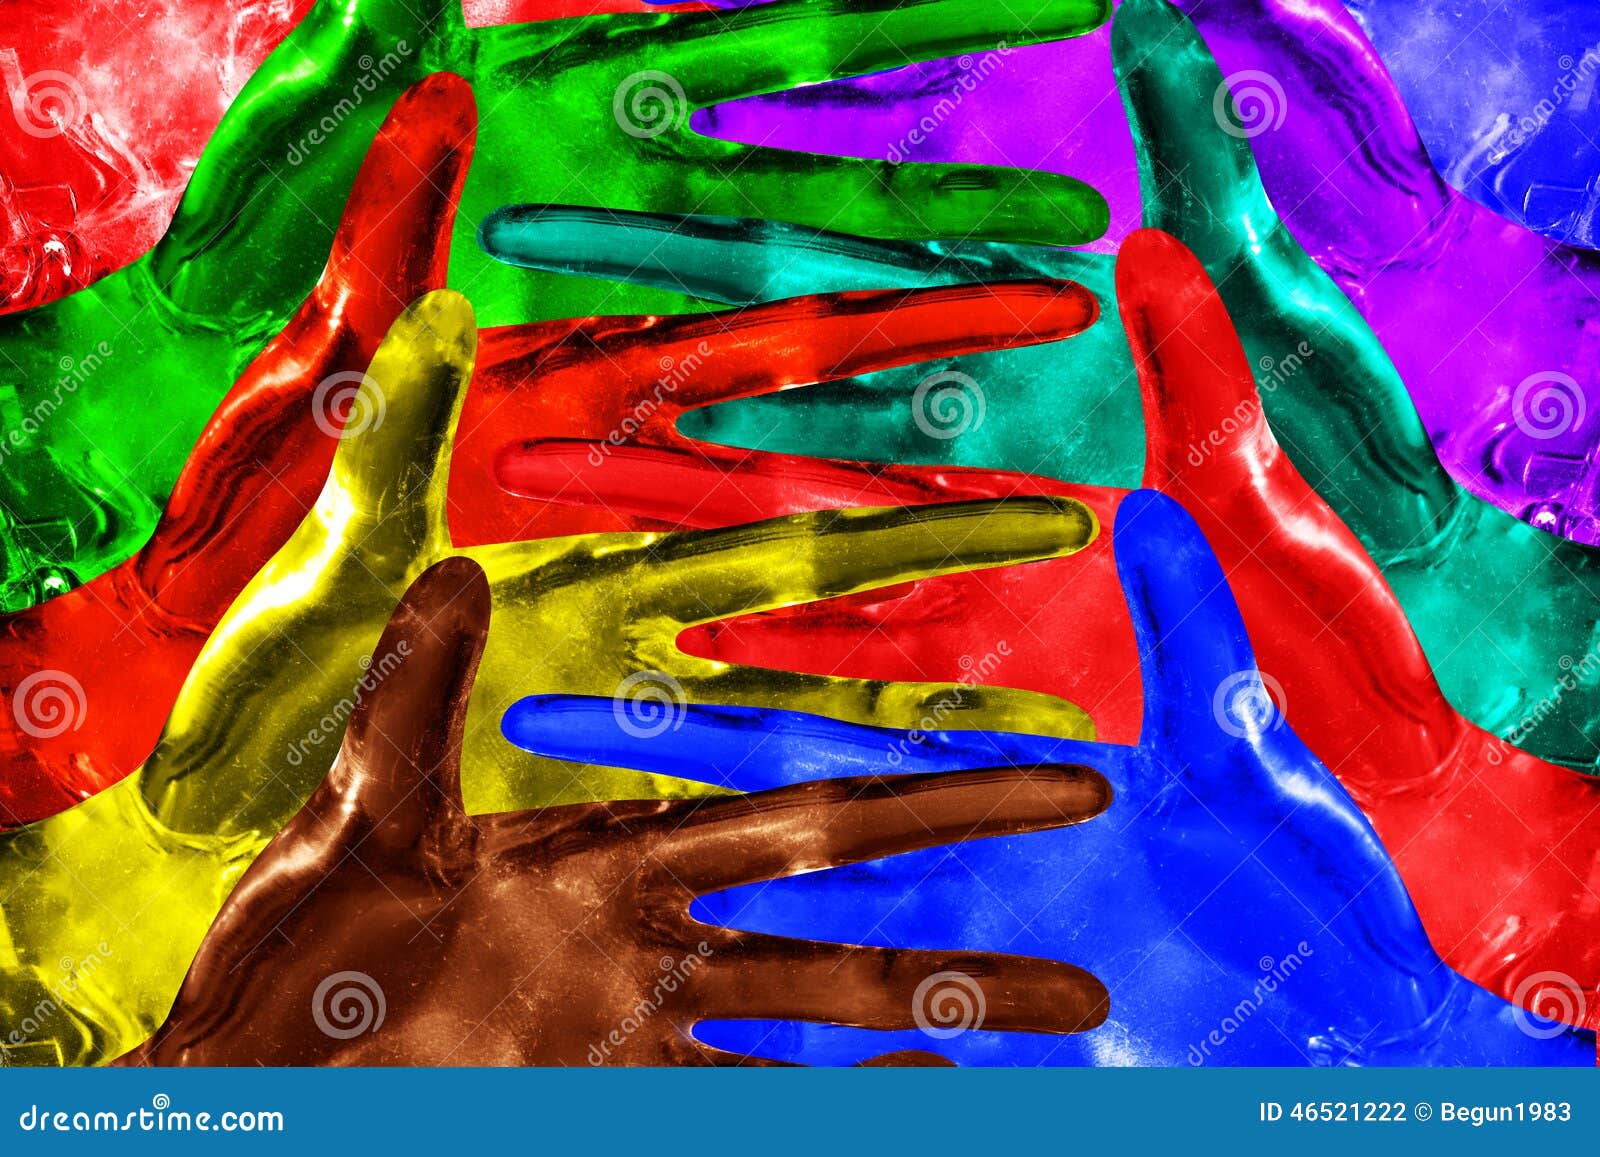 Abstraction From Hand Stock Photo Image Of Introduction 46521222